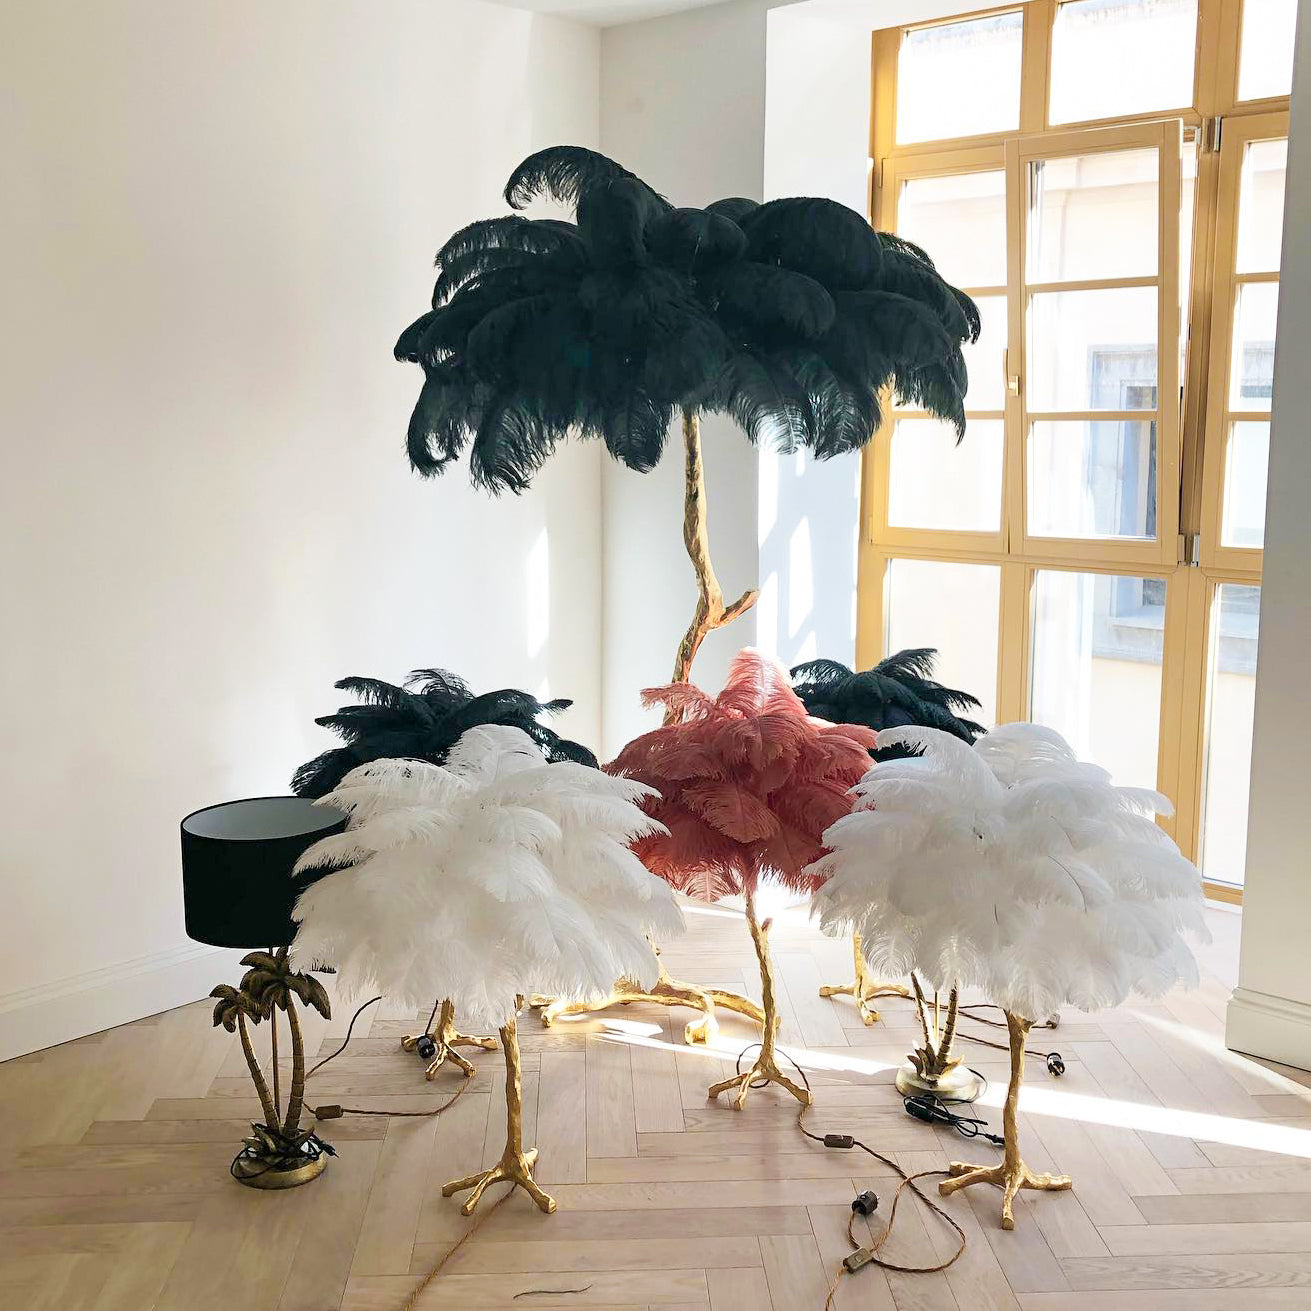 How Ostrich feather is breaking the Mother's Day home decor!